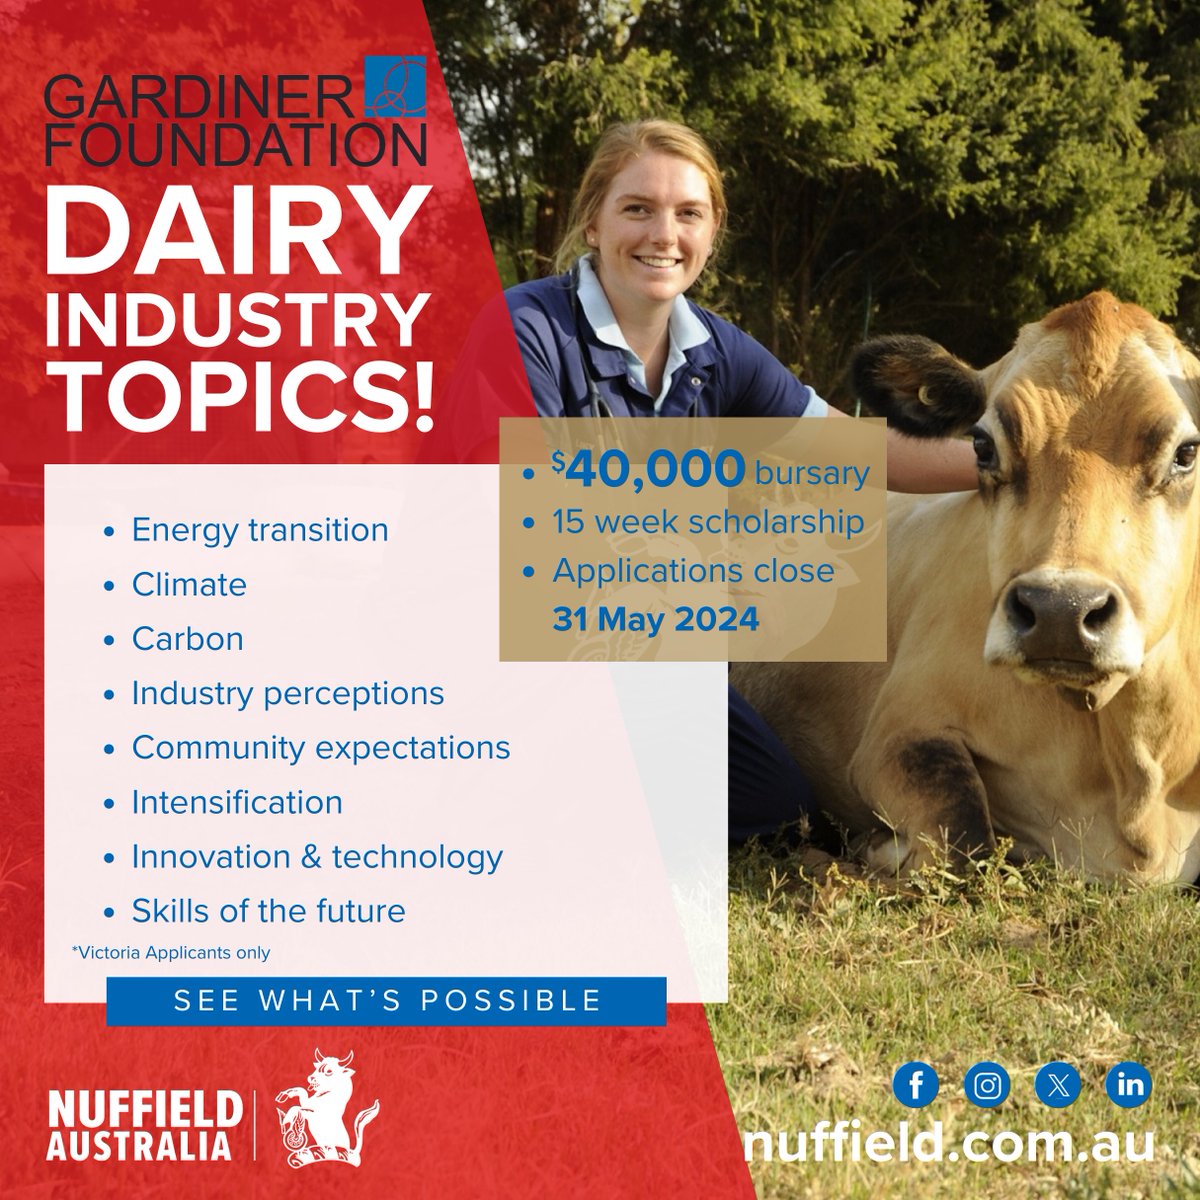 ARE YOU living in a Victorian dairy community or directly involved in the Dairy industry in Victoria, if so apply for a 2025 Nuffield Scholars, generously supported by the Gardiner Foundation Apply today: nuffield.com.au/how-to-apply #nuffieldag #aussiefarmers #futurefarmers #dairy